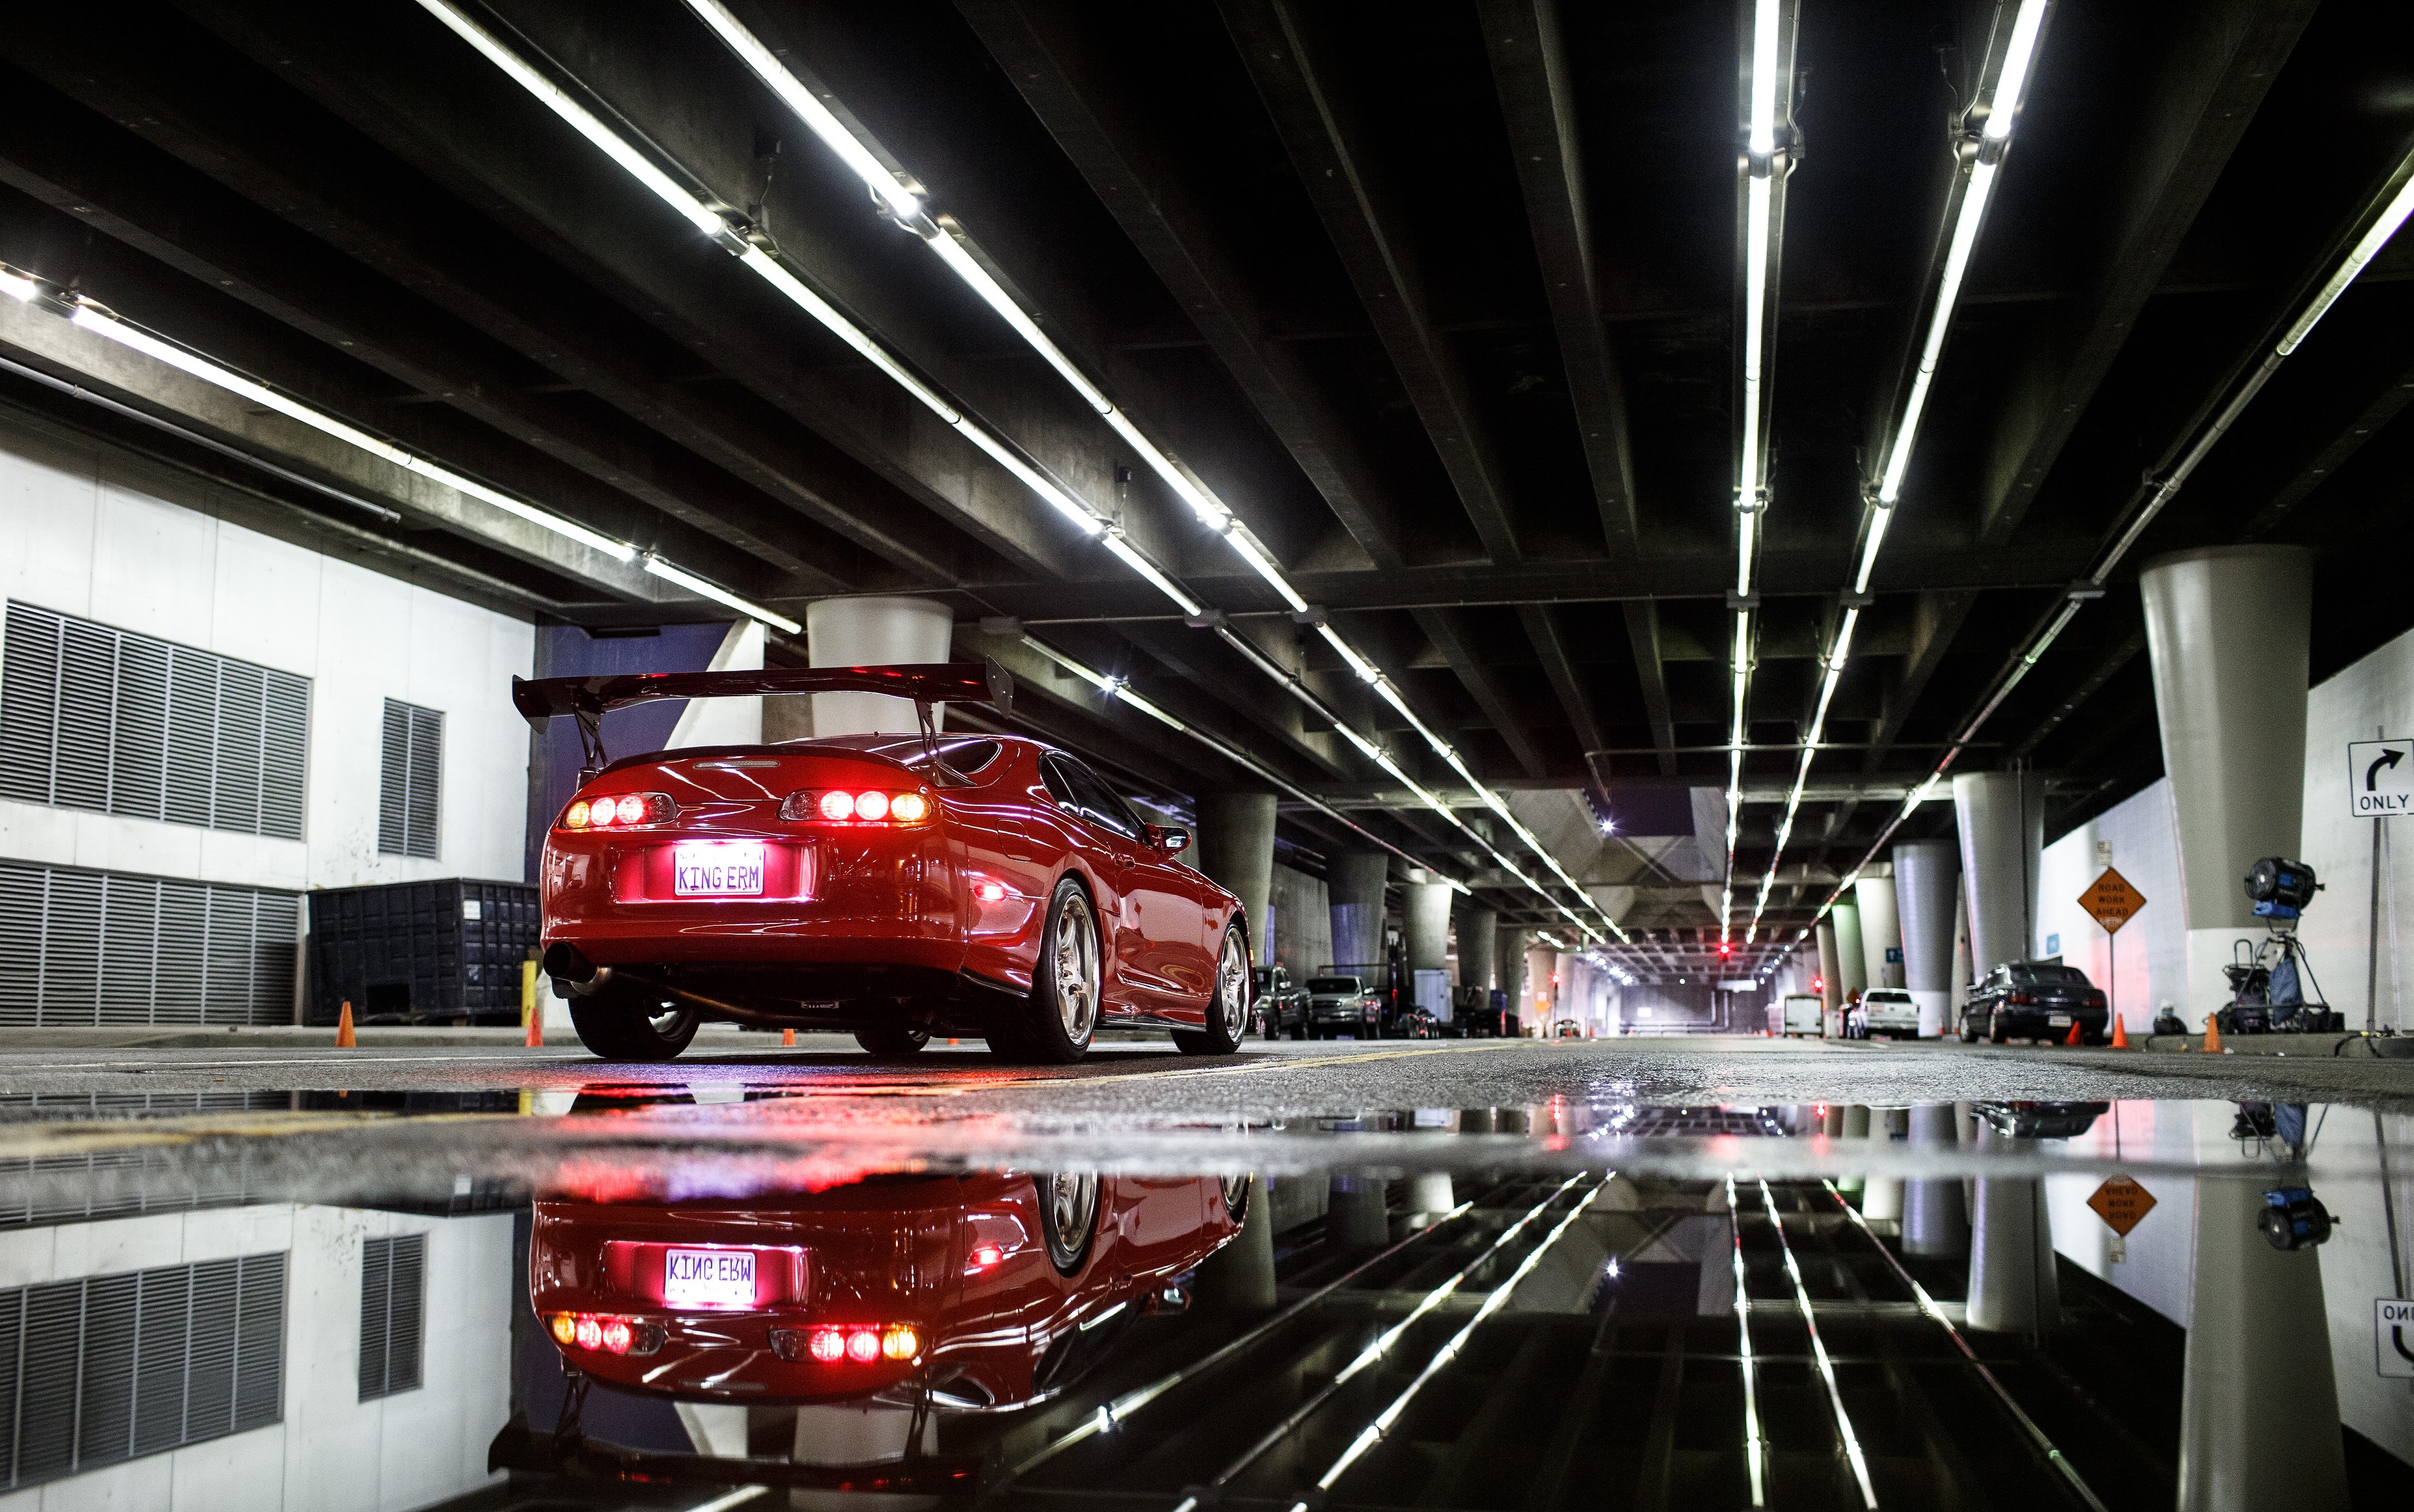 General 3840x2405 Toyota Supra A80 Toyota Supra red cars sports car Japanese cars night city lights Larry Chen